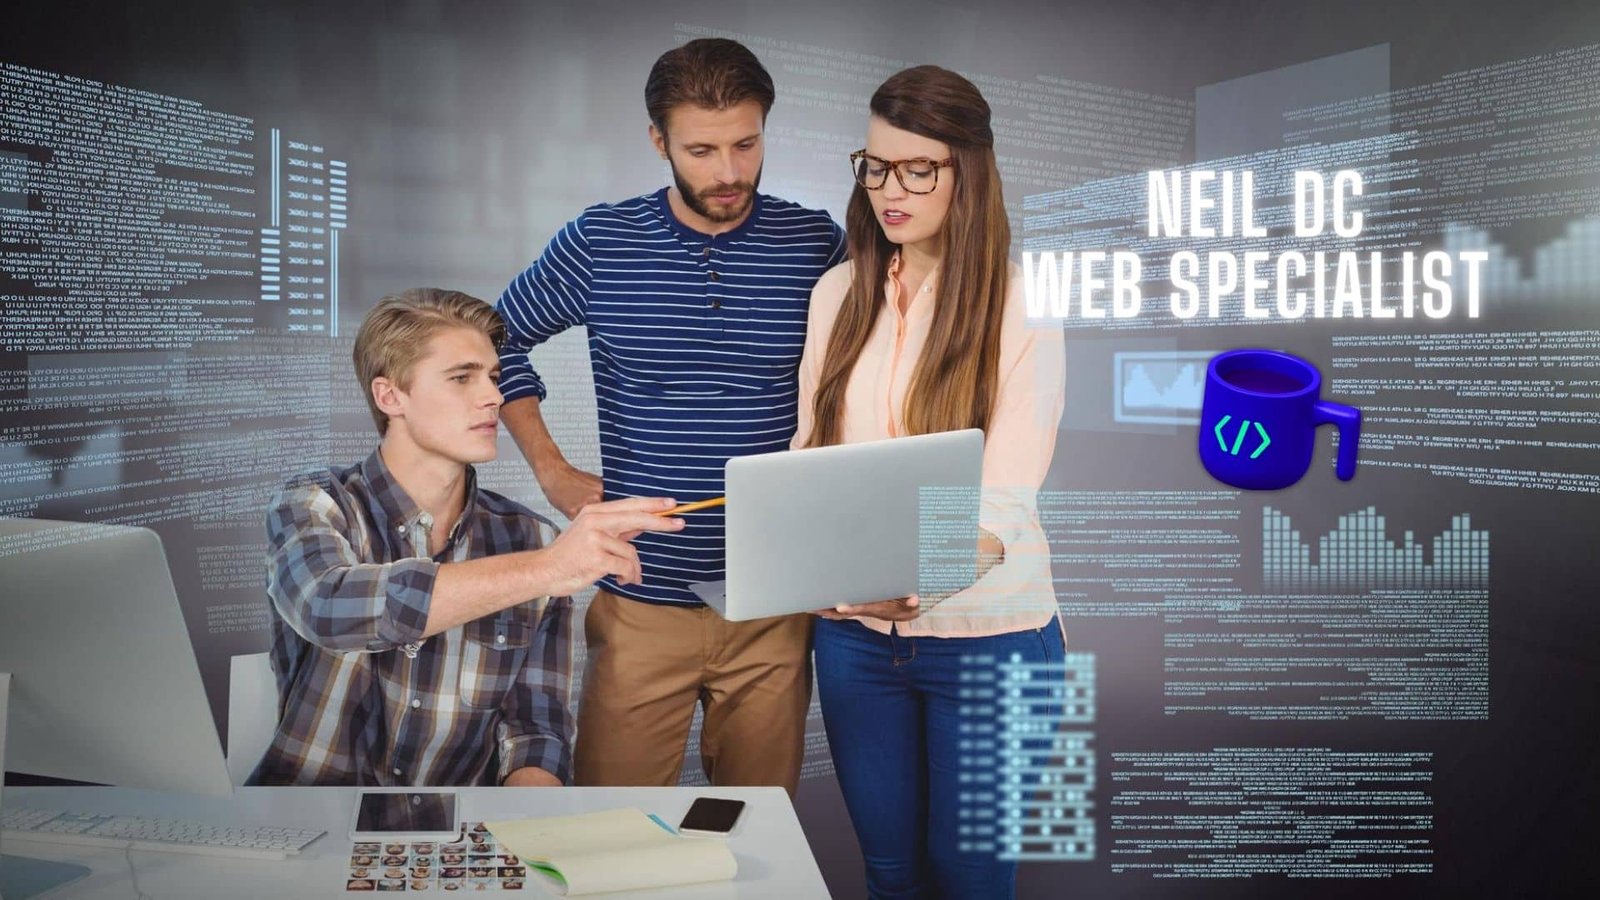 web specialist is a versatile professional responsible for various aspects of website development, maintenance, and optimization.